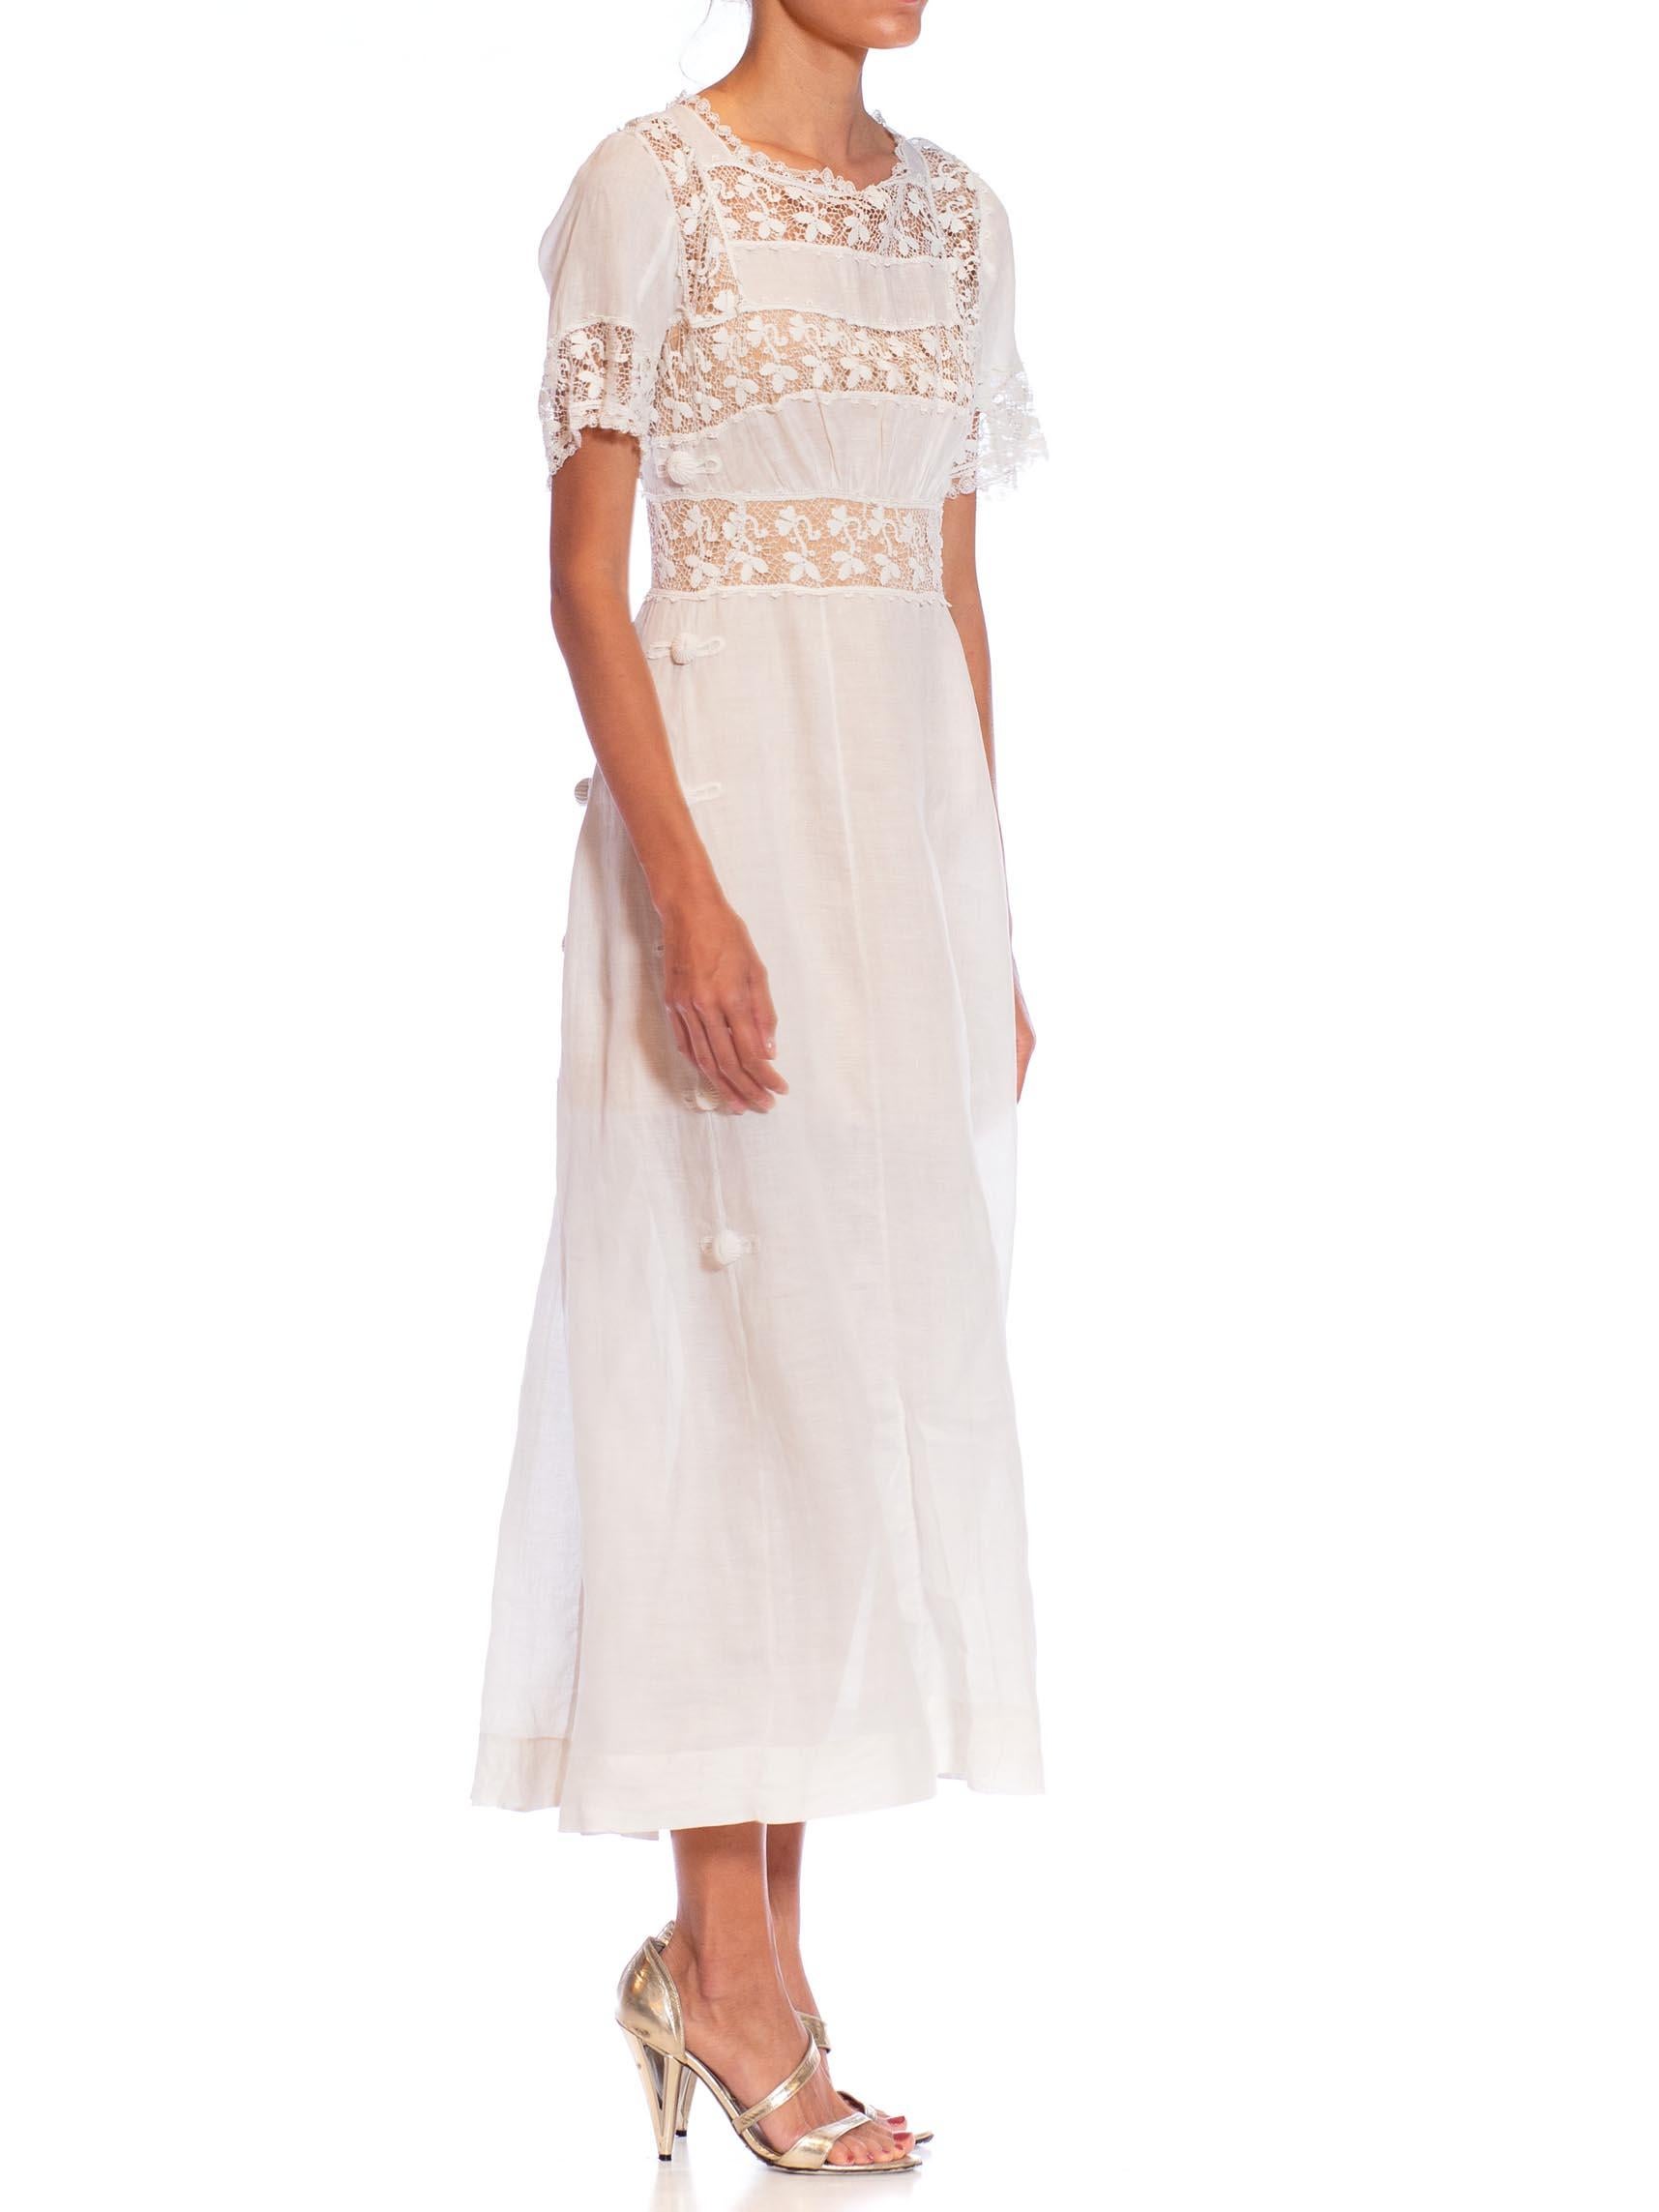 Edwardian White Linen & Lace Tea Dress With Sleeves For Sale 5